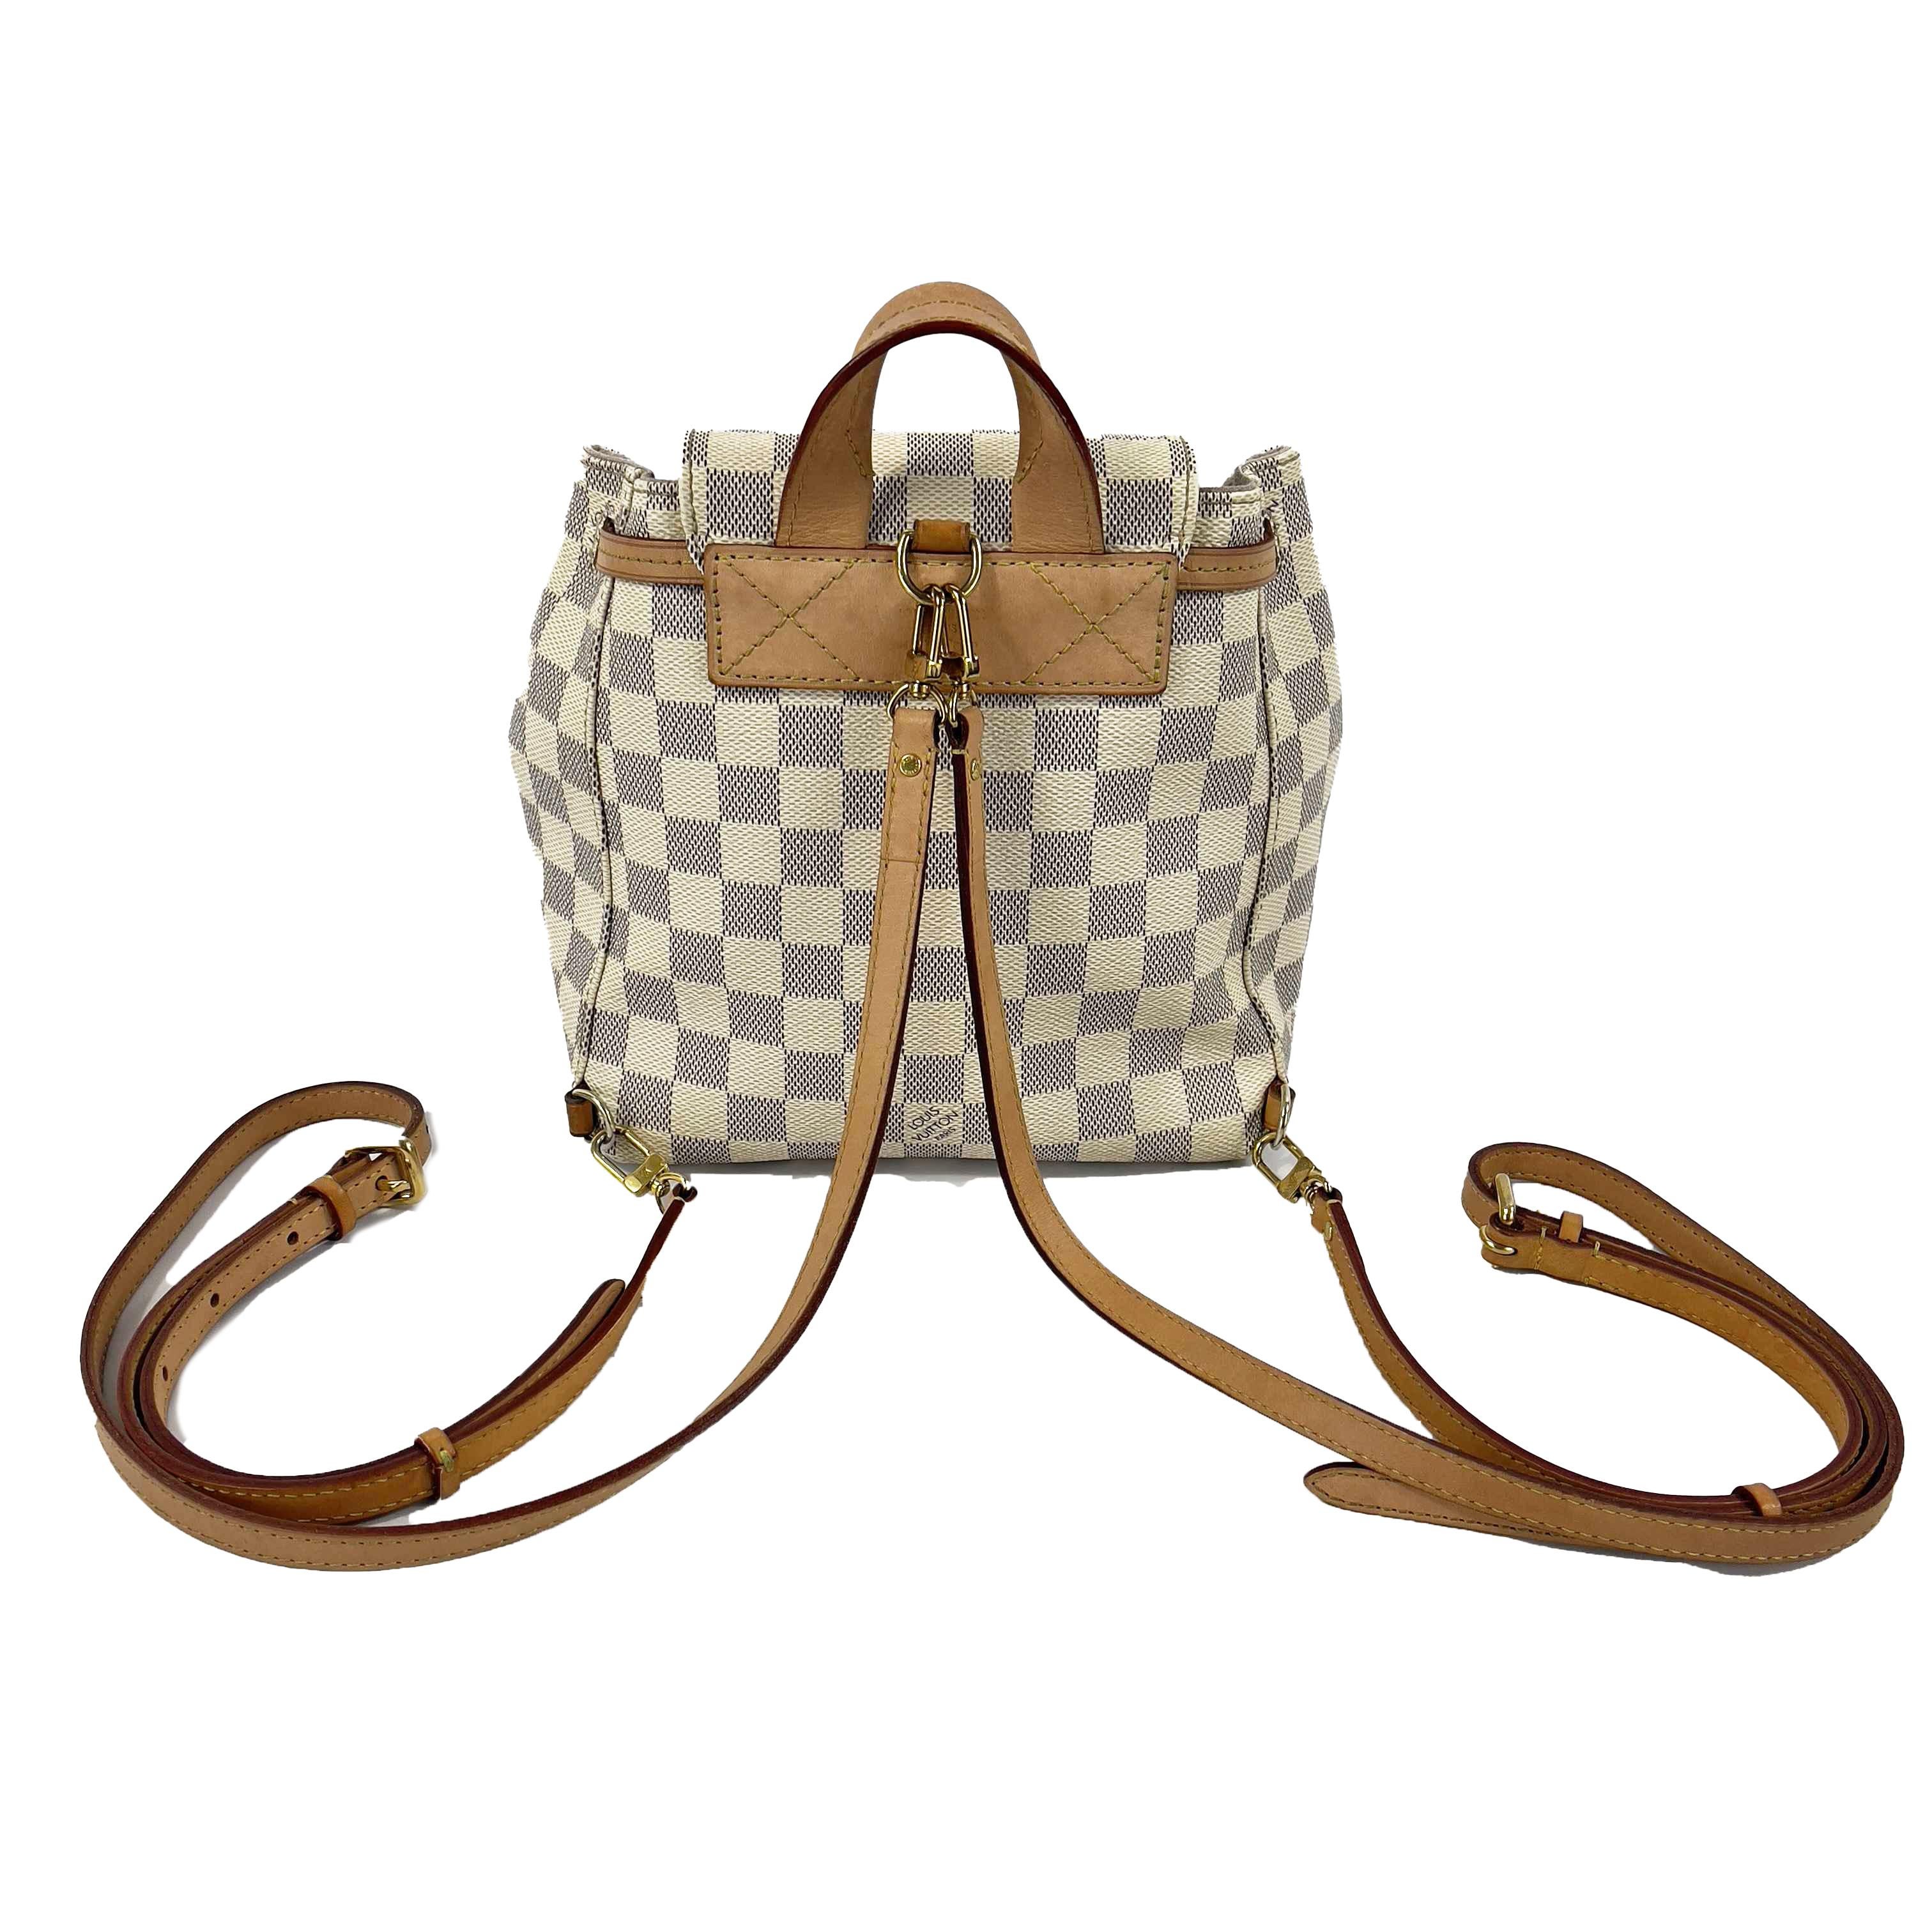 Louis Vuitton - 2019 Damier Azur Sperone BB Backpack - Top Handle

Description

Named for a Corsican beach, the Sperone BB backpack looks cool in Damier Azur canvas.
Light and easy to carry with its top handle and adjustable straps, this charming